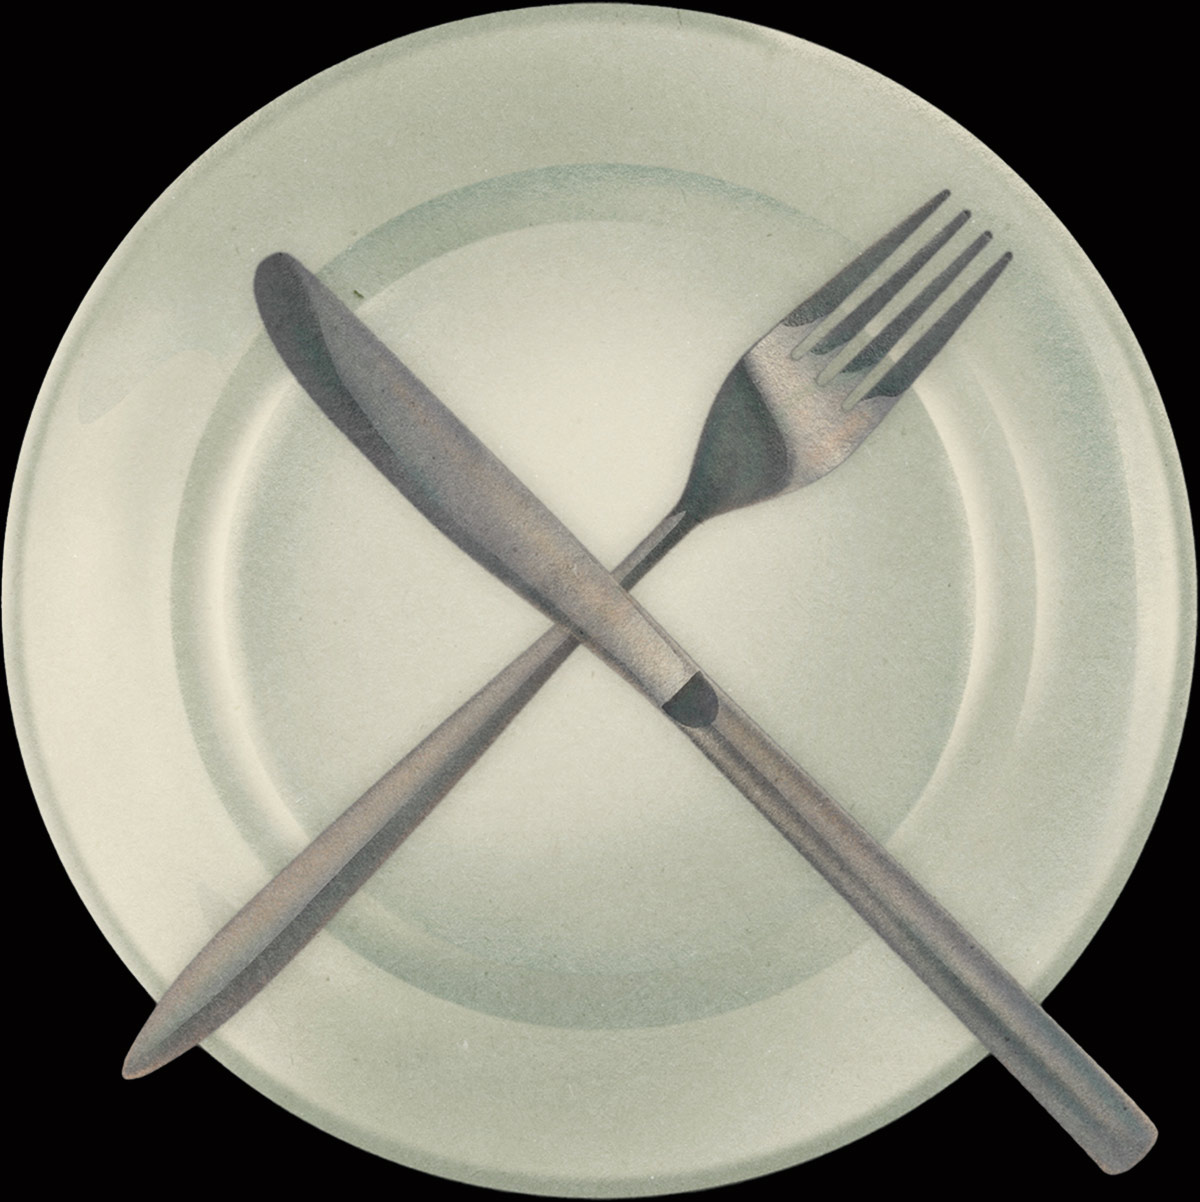 plate with fork and knife making an X shape on top